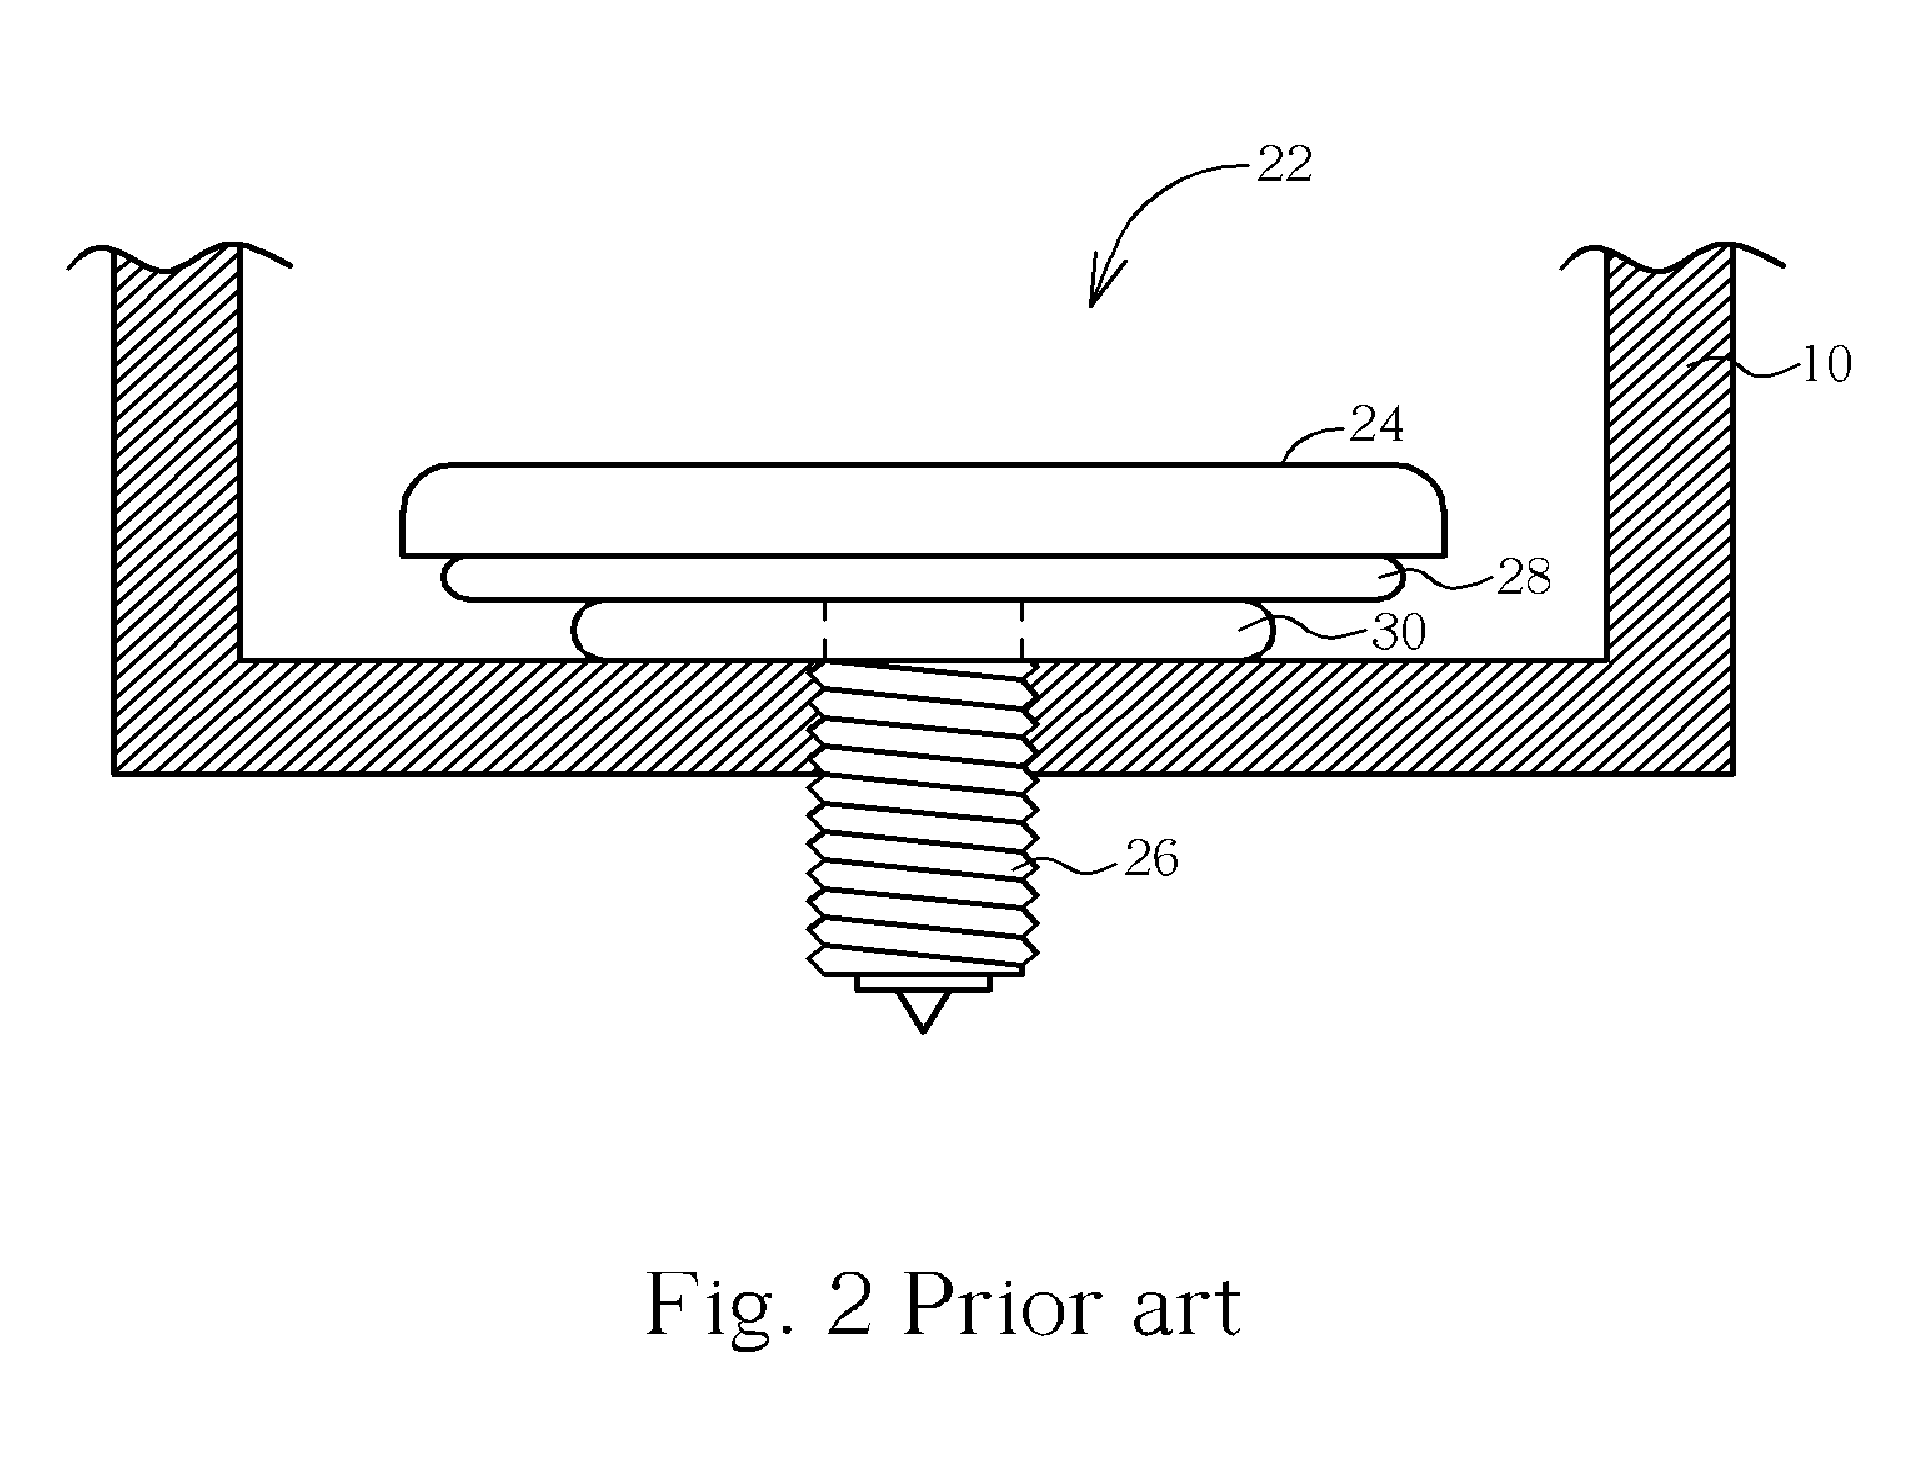 Arc chamber for an ion implantation system